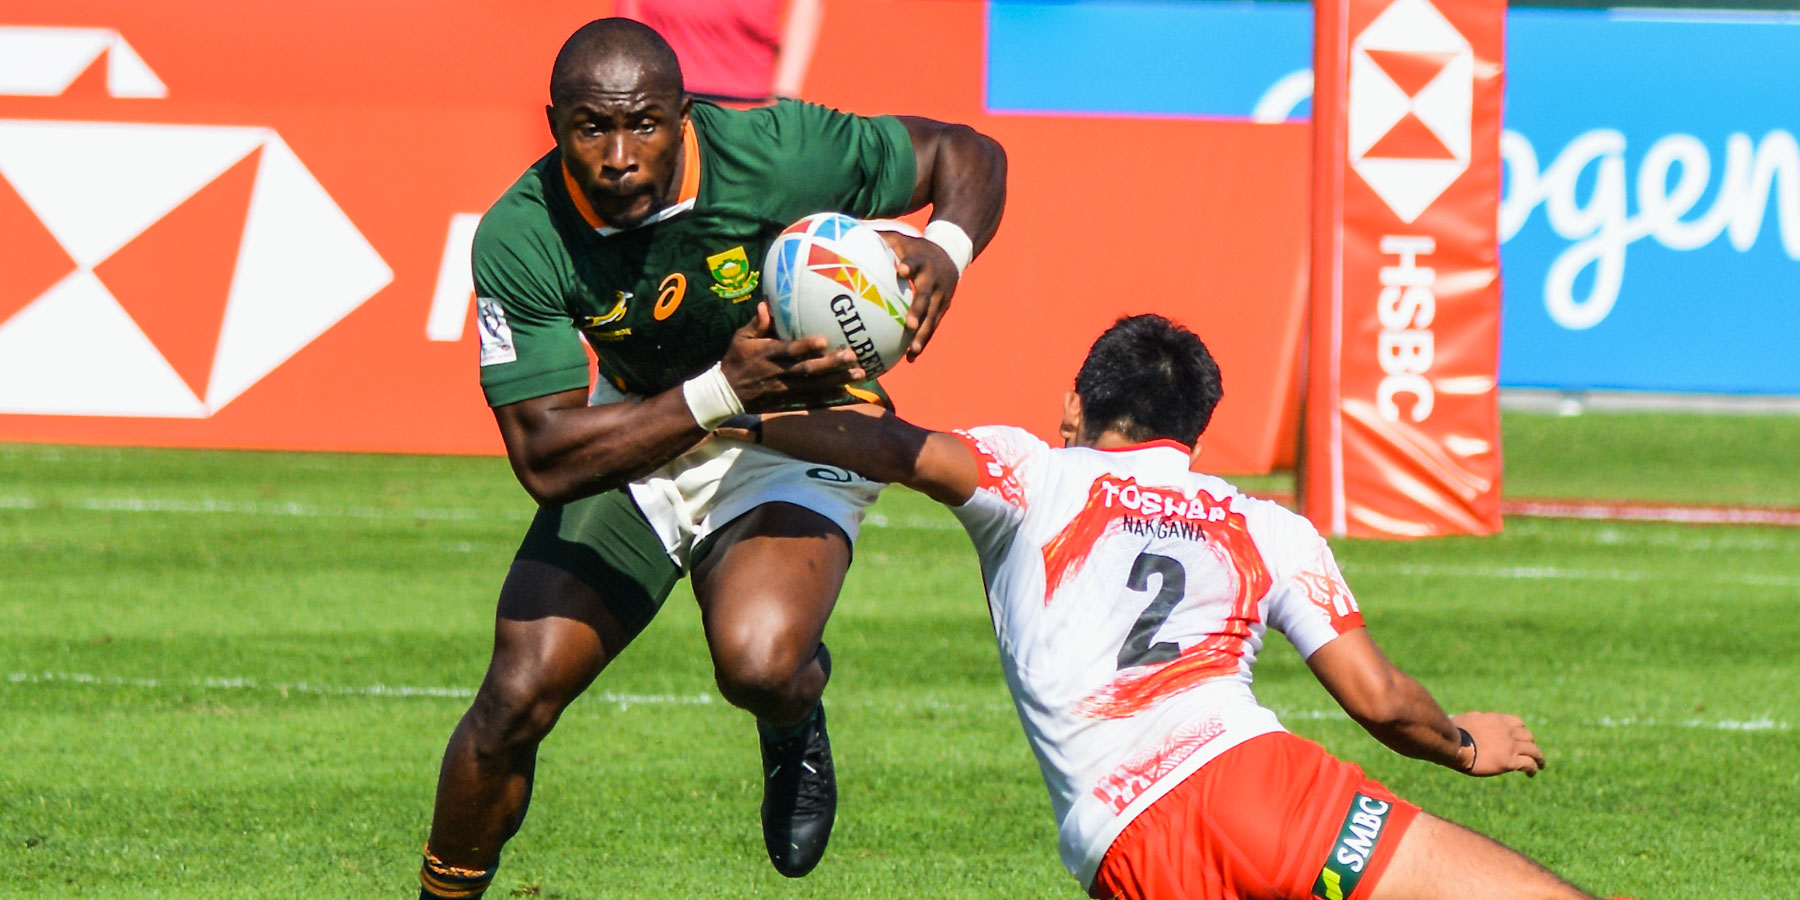 Siviwe Soyizwapi scored two tries against Japan in the second pool game.